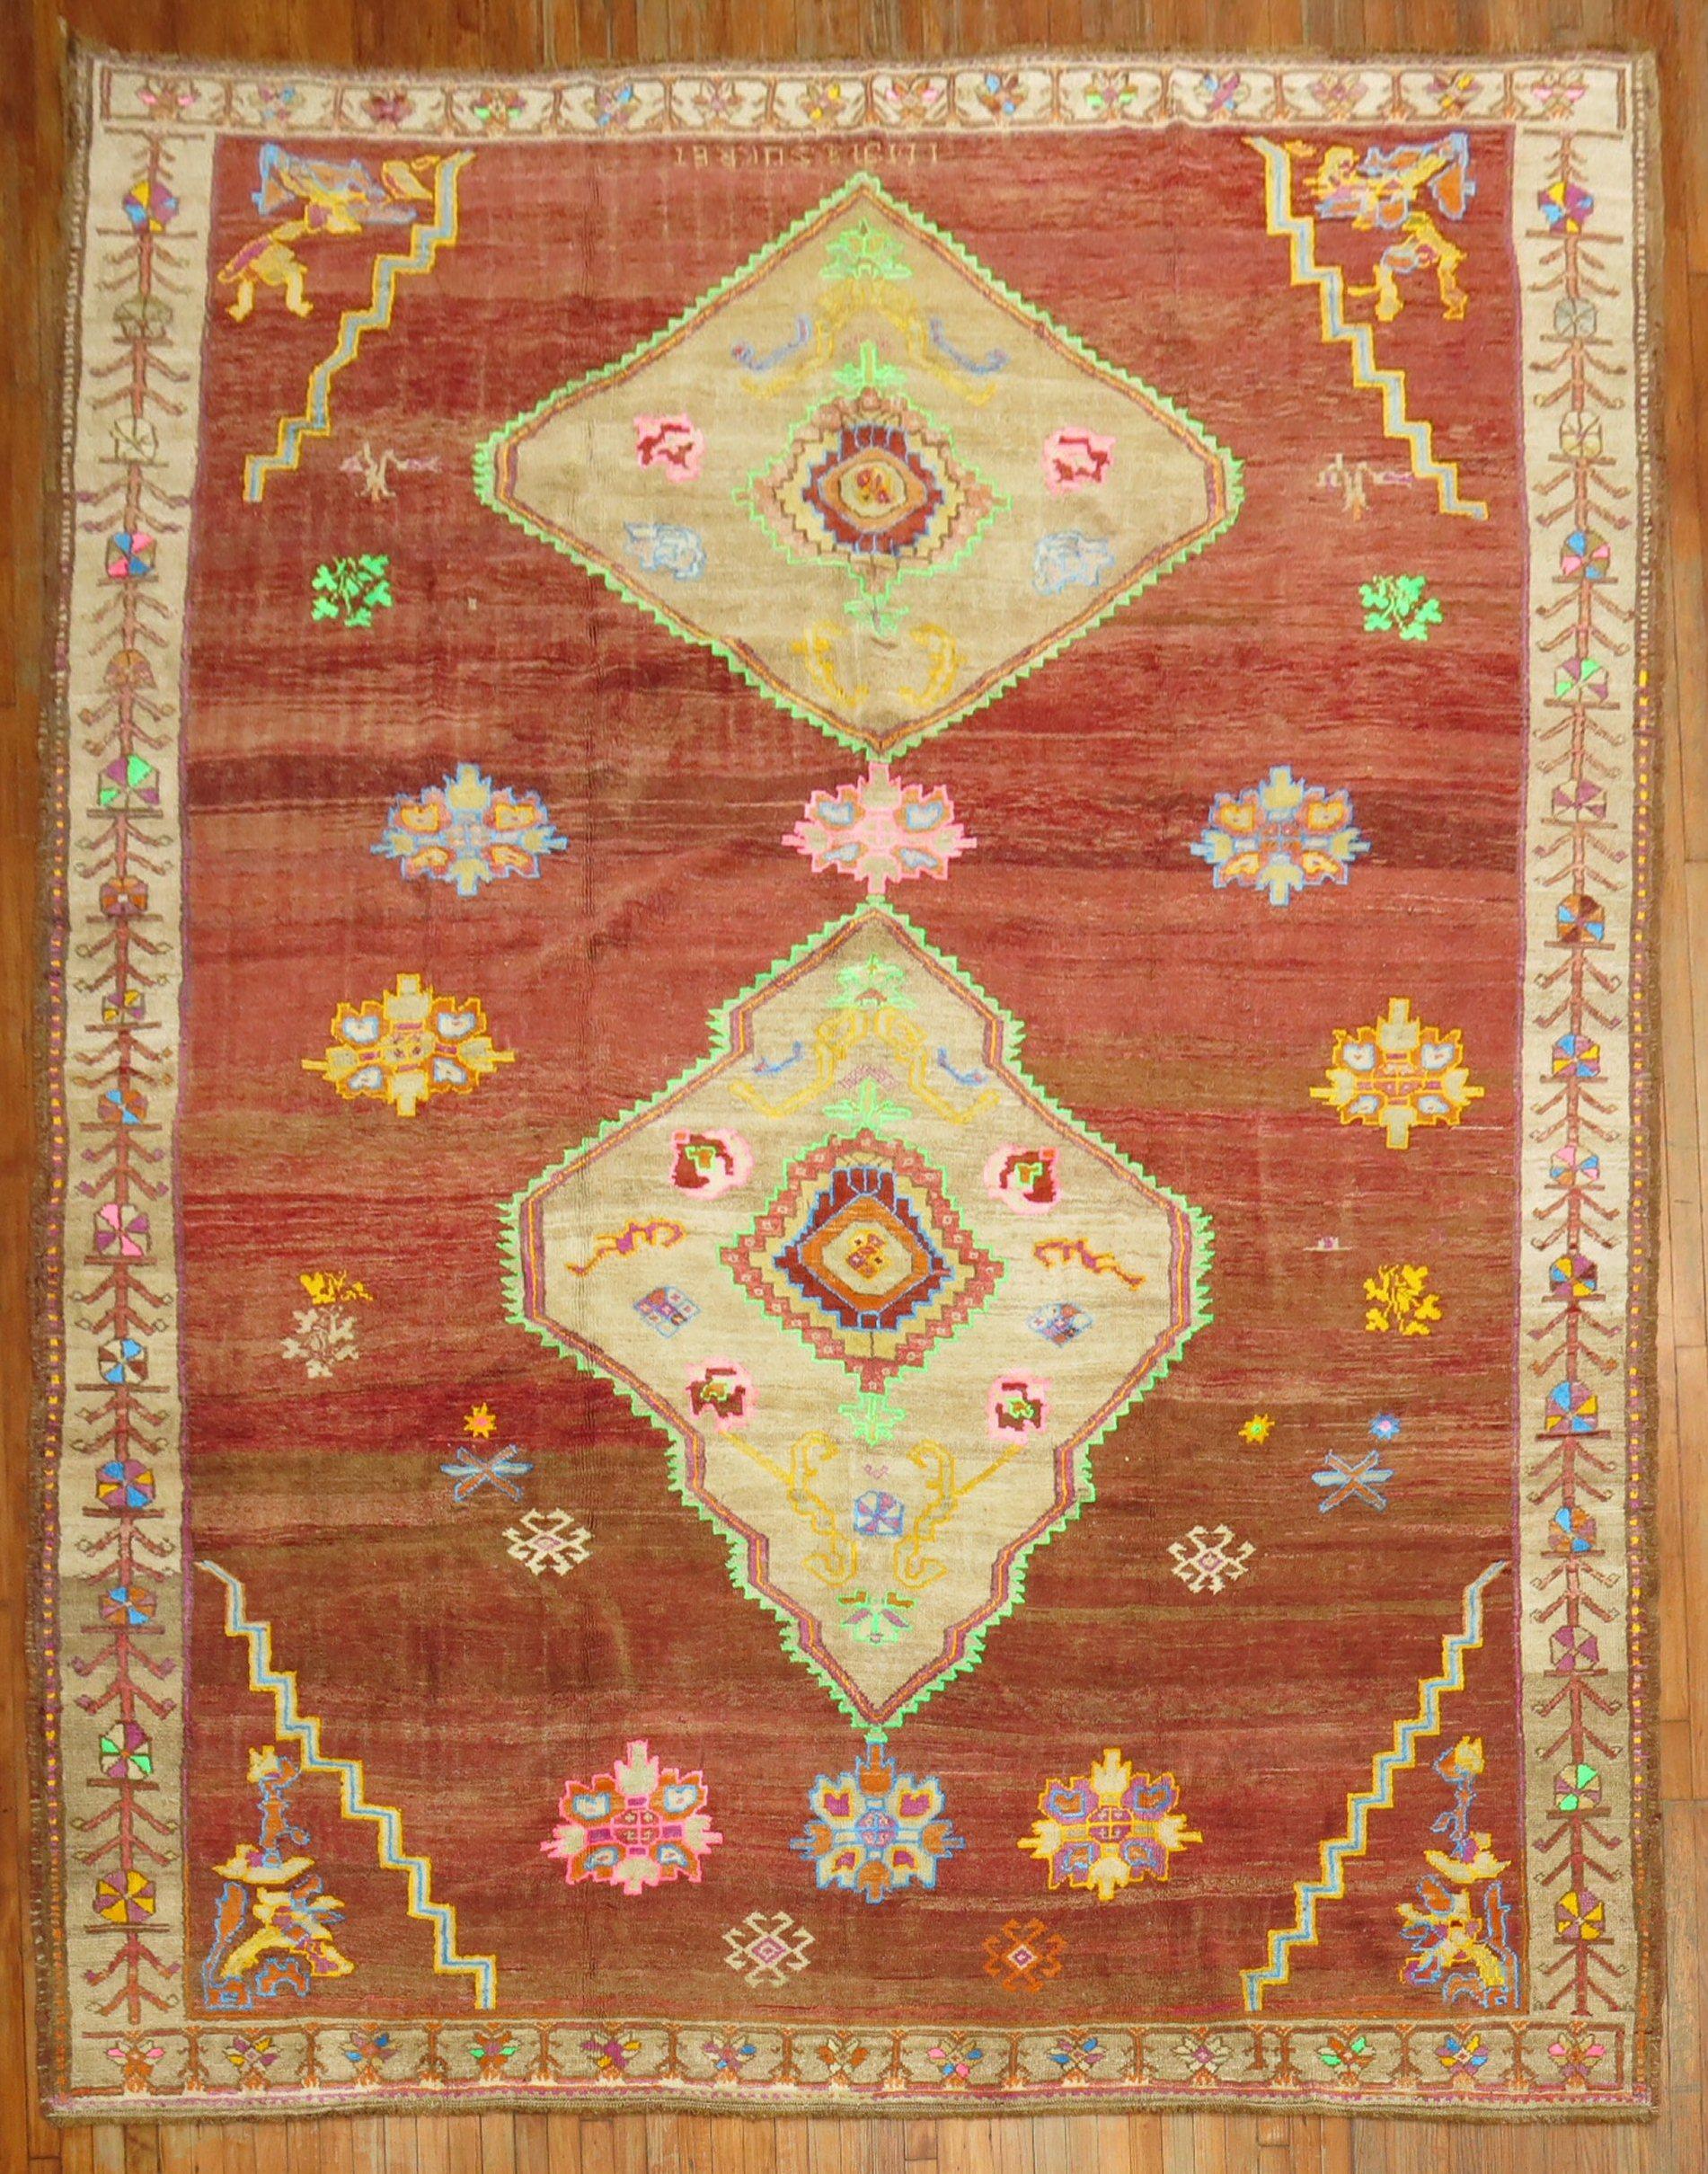 Wild room size Turkish kars rug from the middle of the 20th century. 2 medallions on a brown field, accents in neon green, electric blue, sunny yellow, pumpkin orange and bright pinks
A statement piece might be best to start your room around the